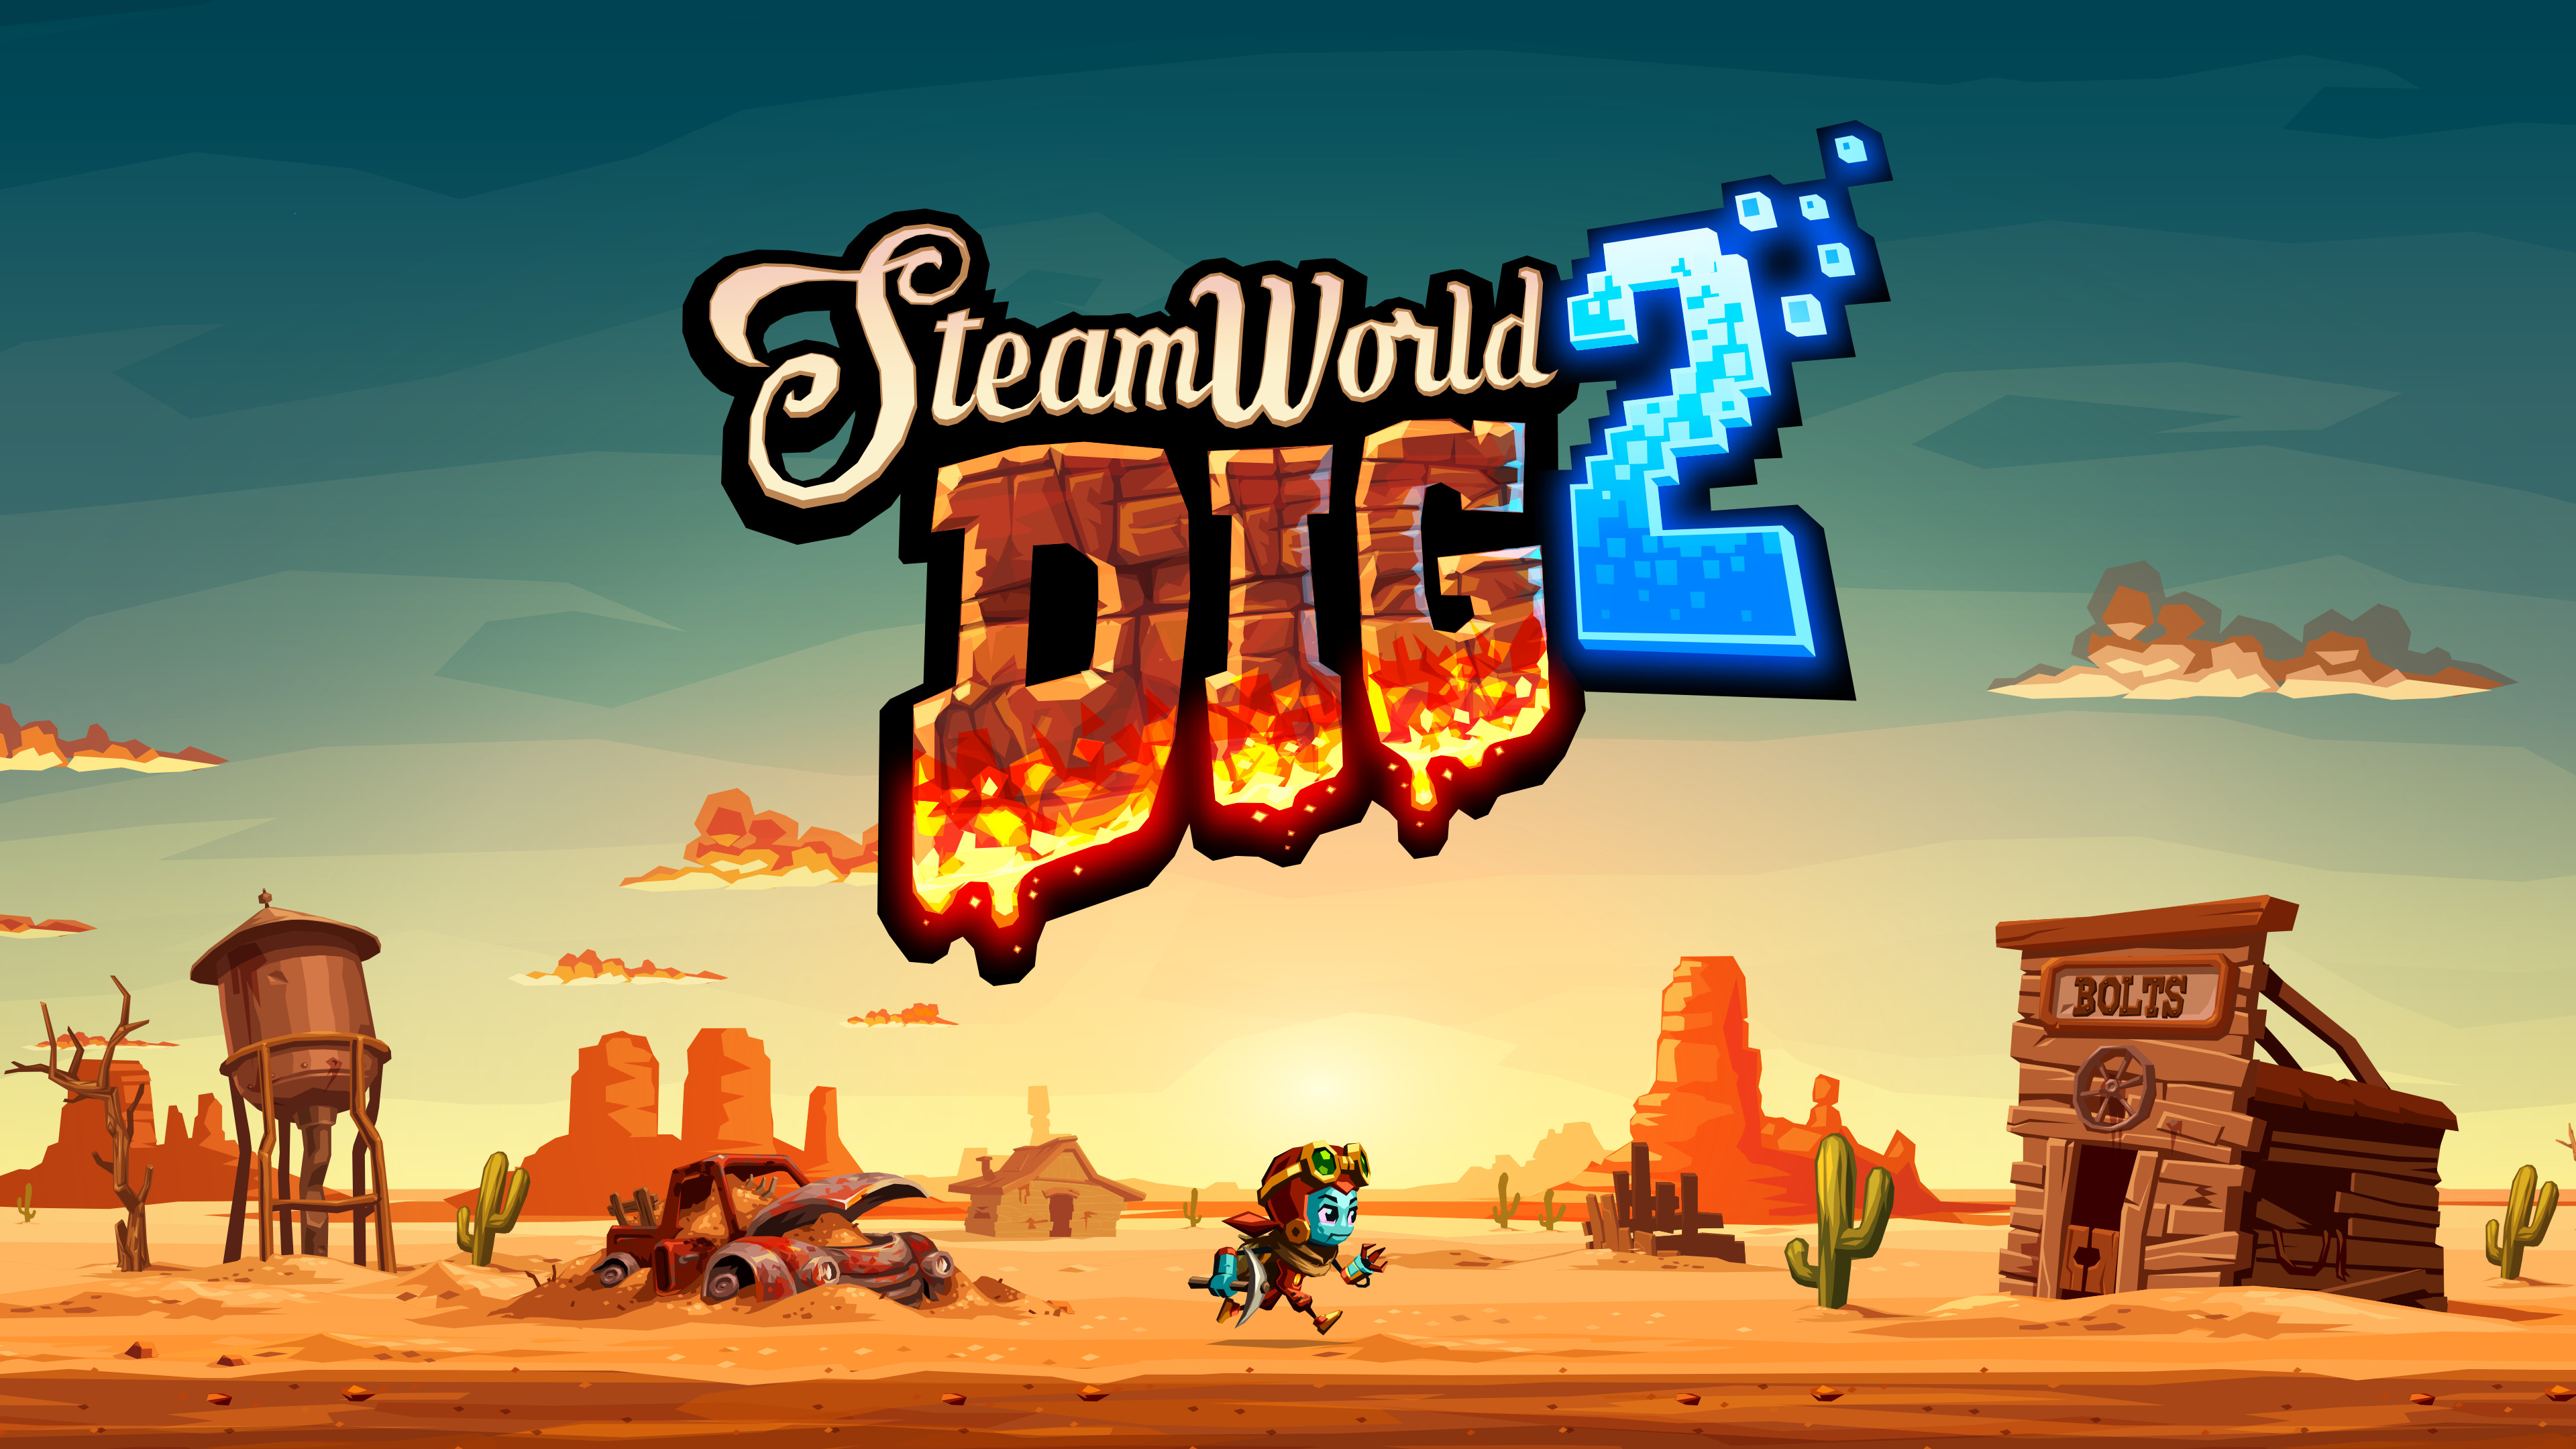 SteamWorld Build is the Dig story you know and love in a fabulous new form